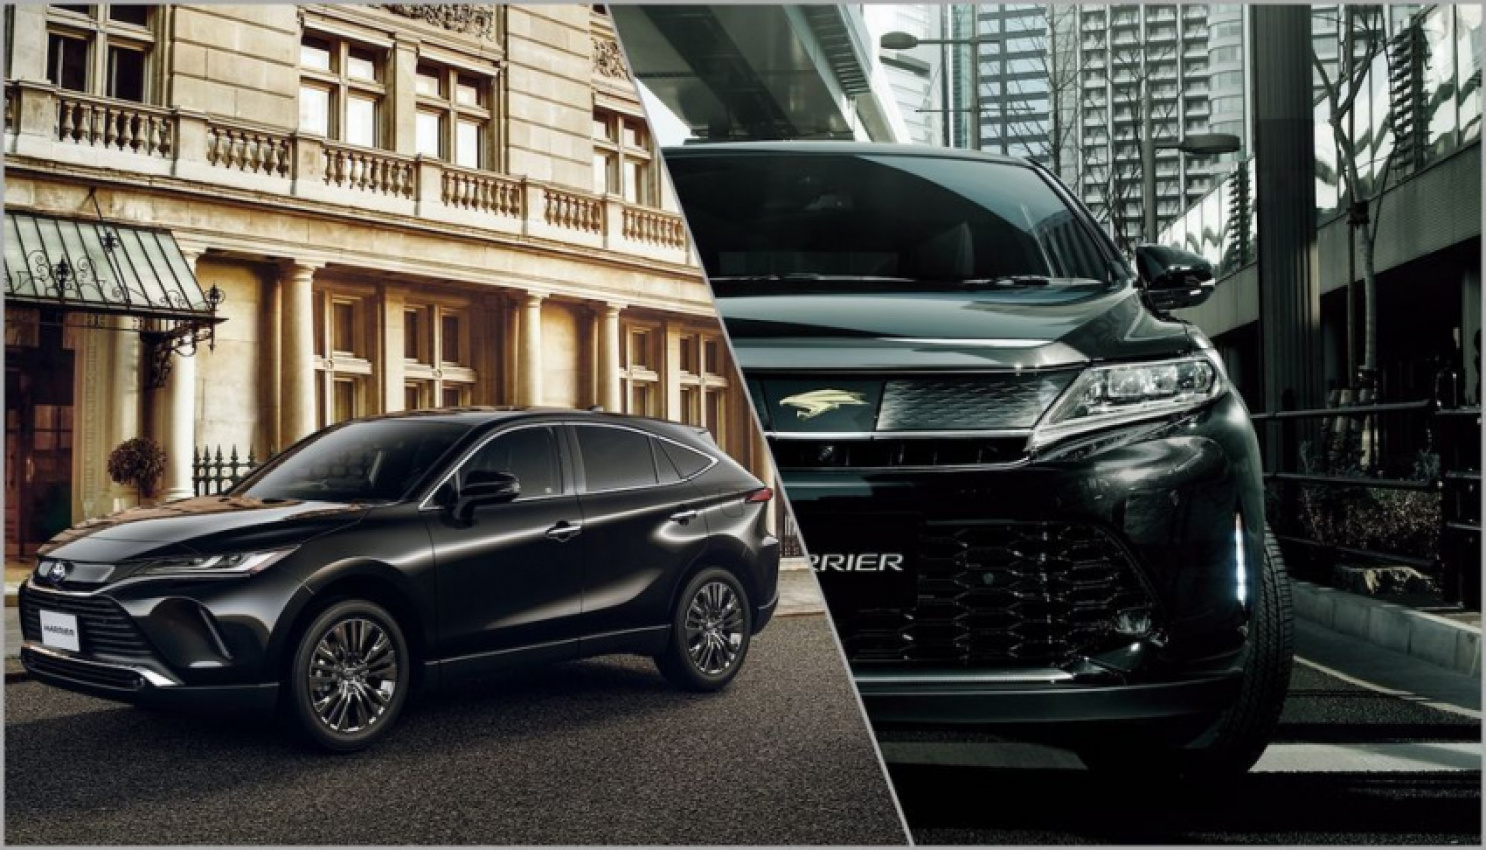 autos, cars, reviews, toyota, insights, toyota harrier, toyota harrier 2020, toyota harrier 2020 versus its older self - extra status, more luxury